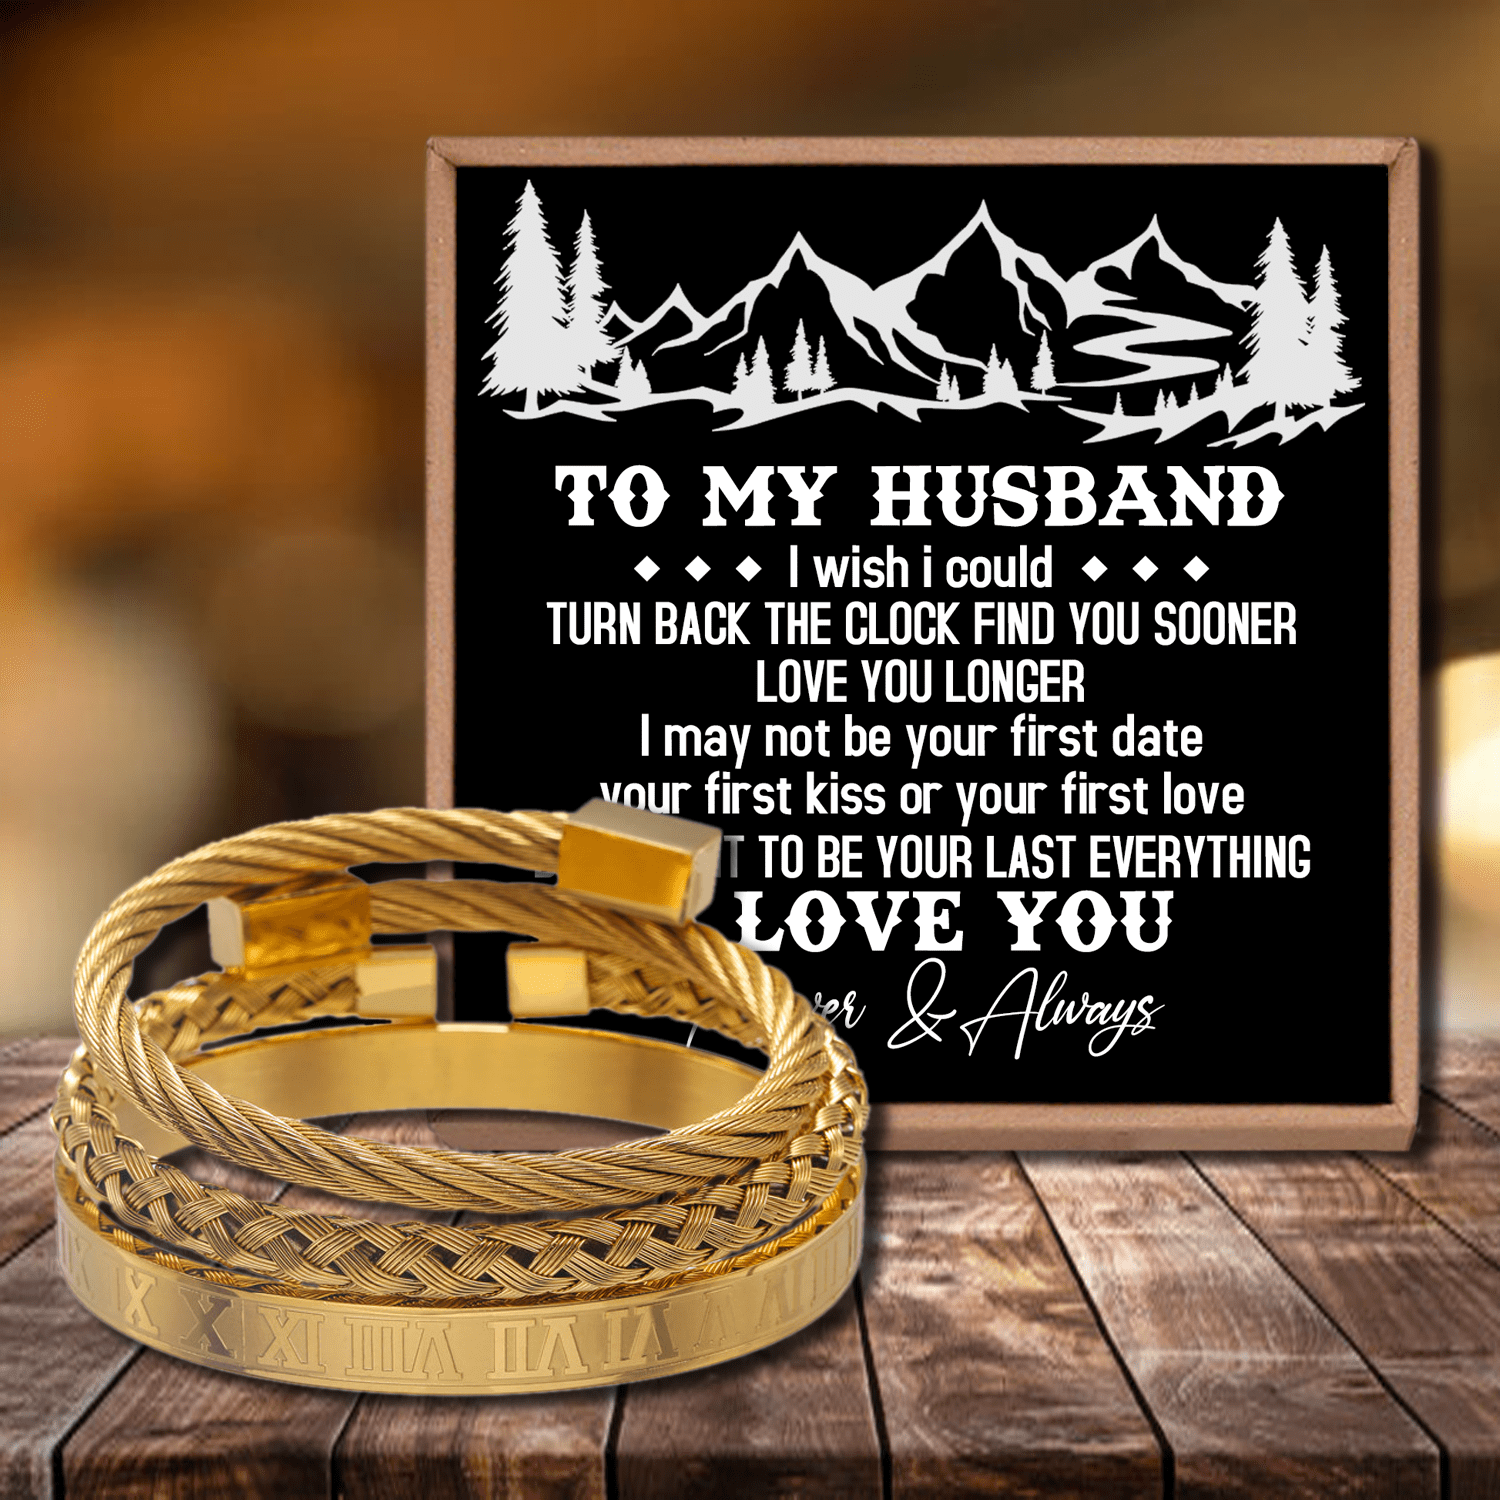 Bracelets To My Husband - I Want To Be Your Last Everything Roman Numeral Bracelet Set Gold GiveMe-Gifts